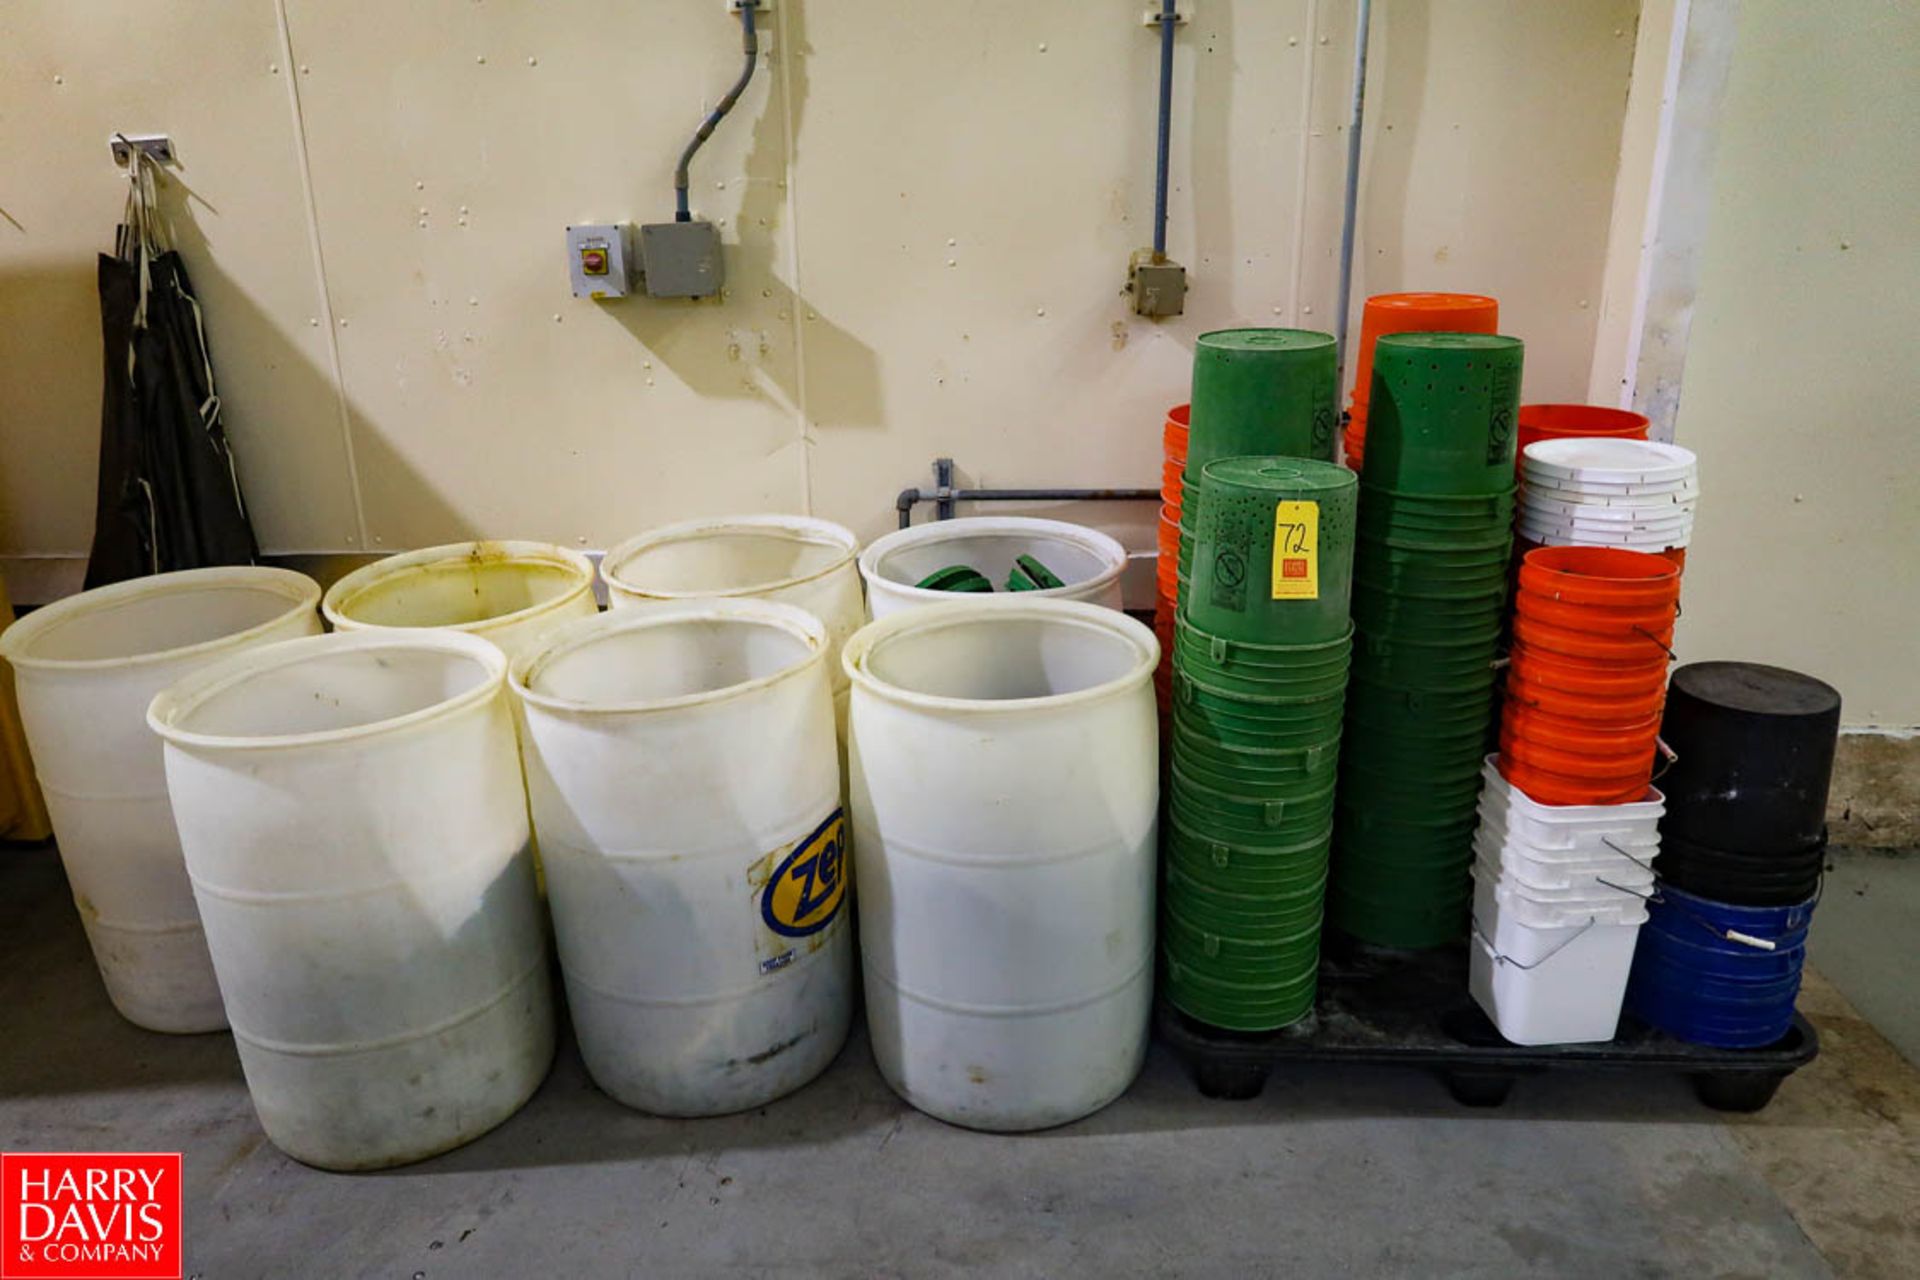 Large Qty of 5-Gallon Buckets & Lids. Rigging Fee: $ 125.00